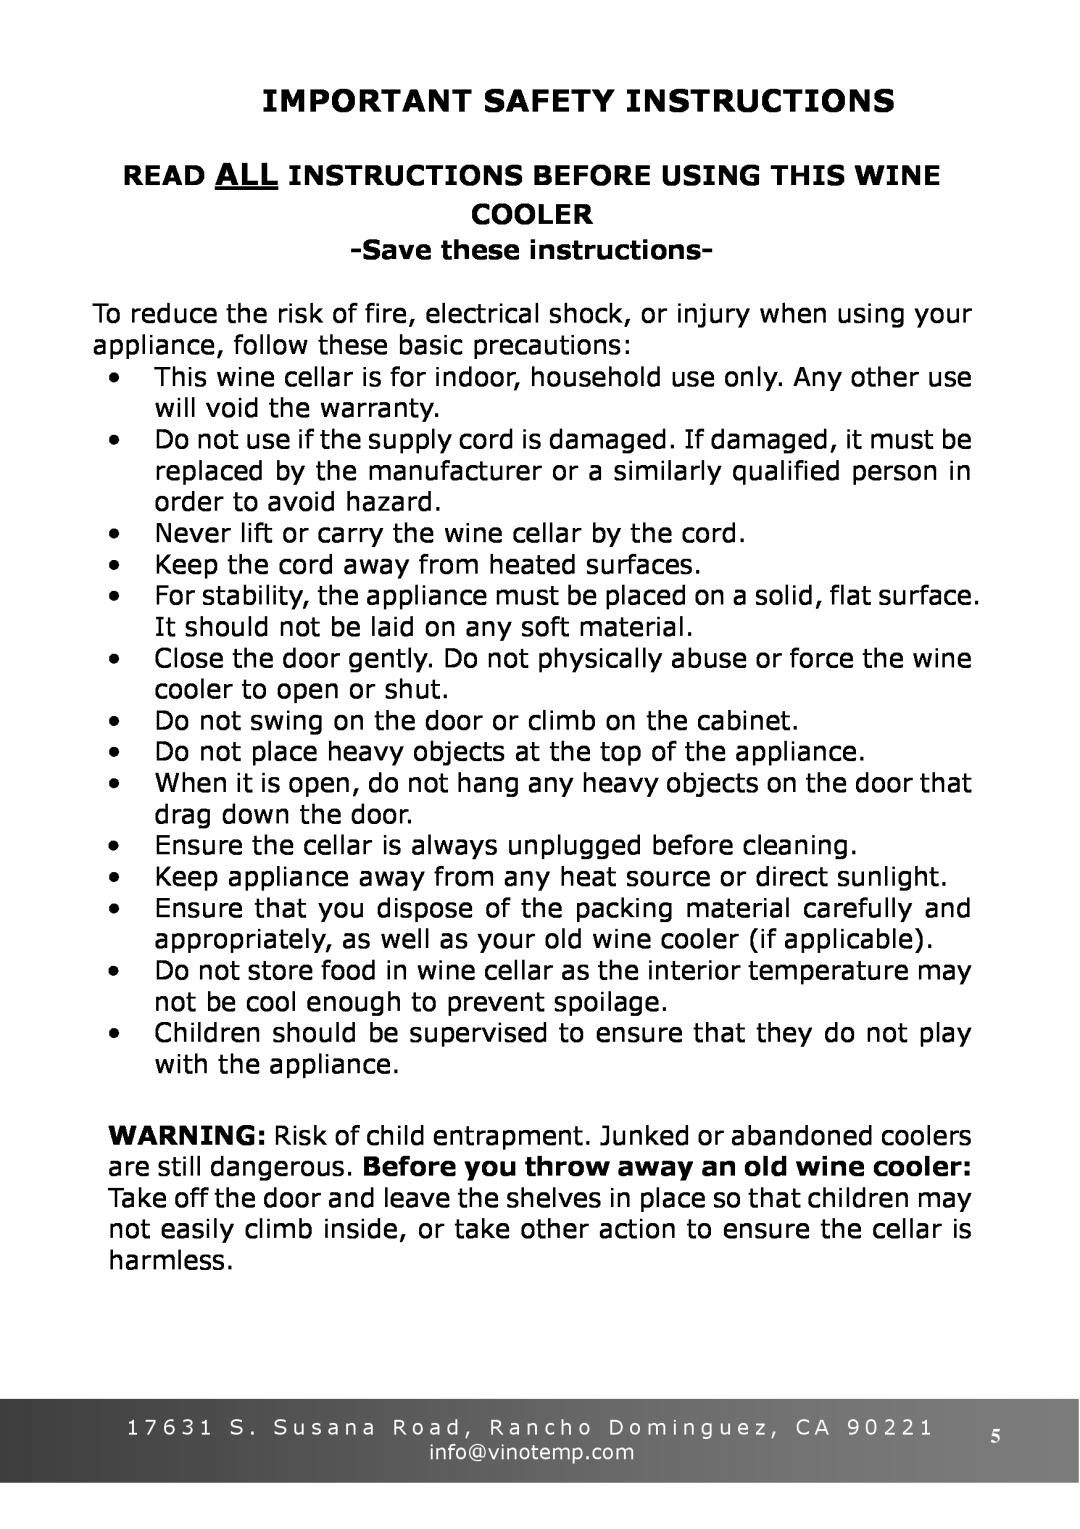 Vinotemp VT-6TED-WB Important Safety Instructions, Savethese instructions, Read Allinstructions Before Using This Wine 